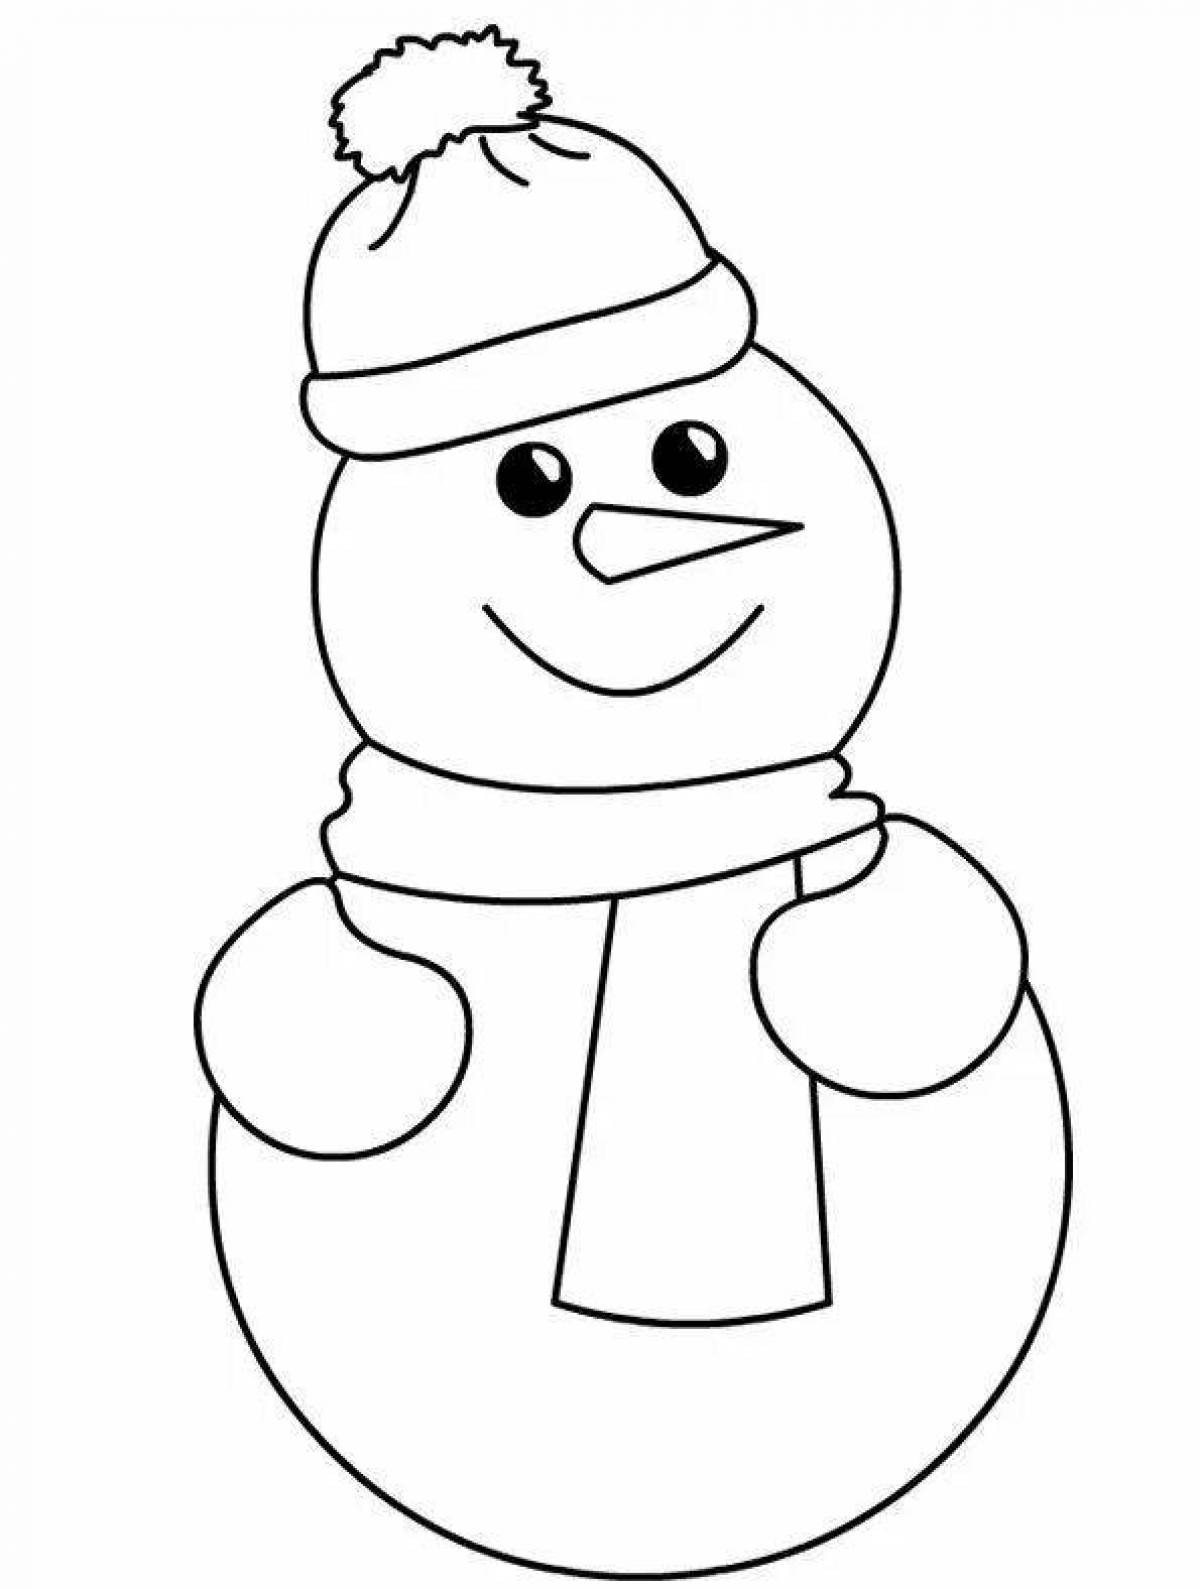 Crazy snowman coloring book for kids 2-3 years old